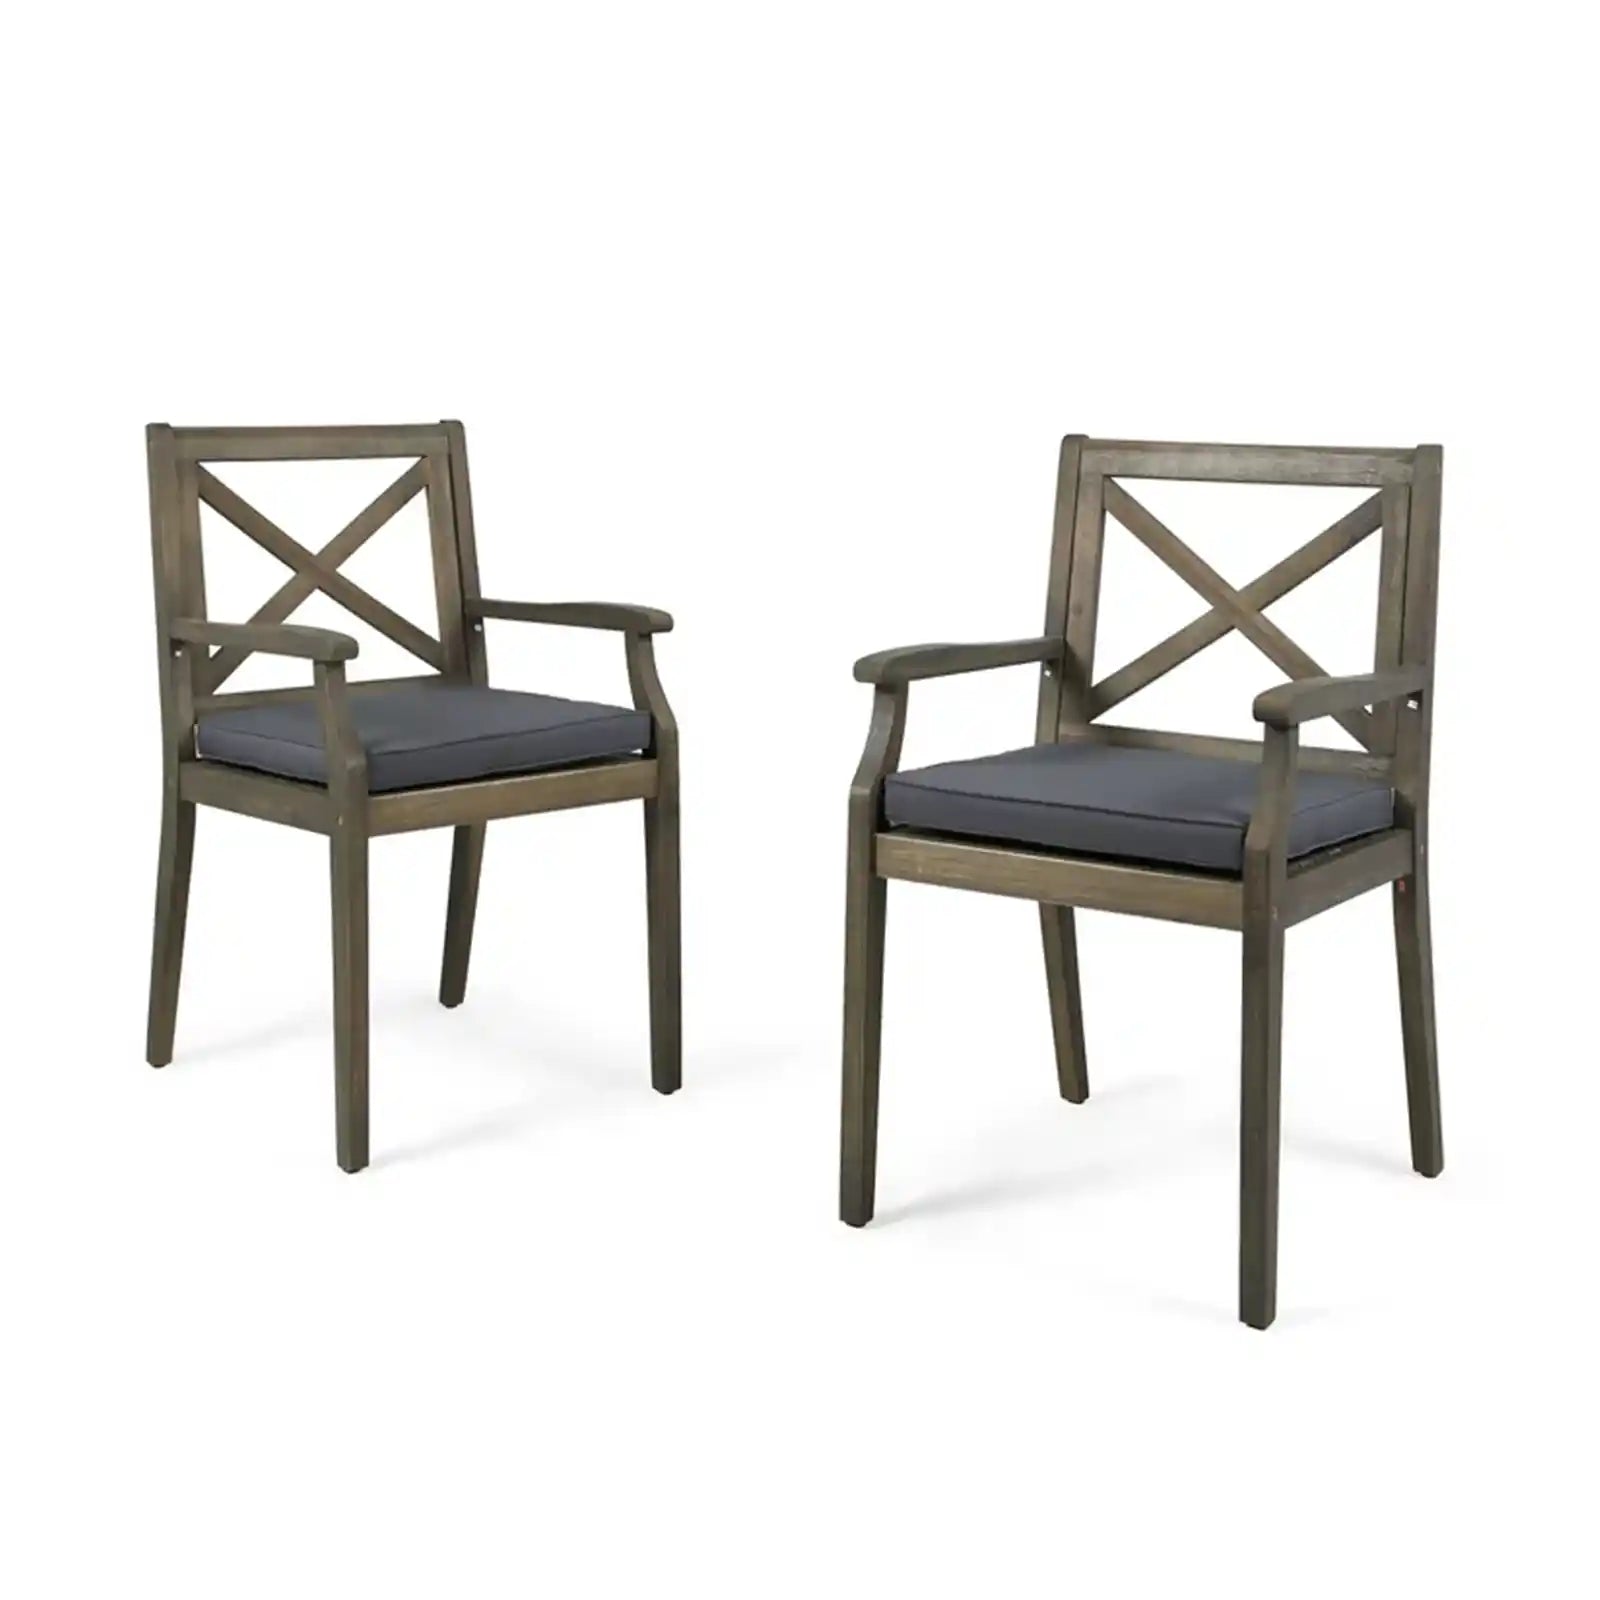 Outdoor - Indoor Acacia Wood Dining Chair with Cushions, Set of 2